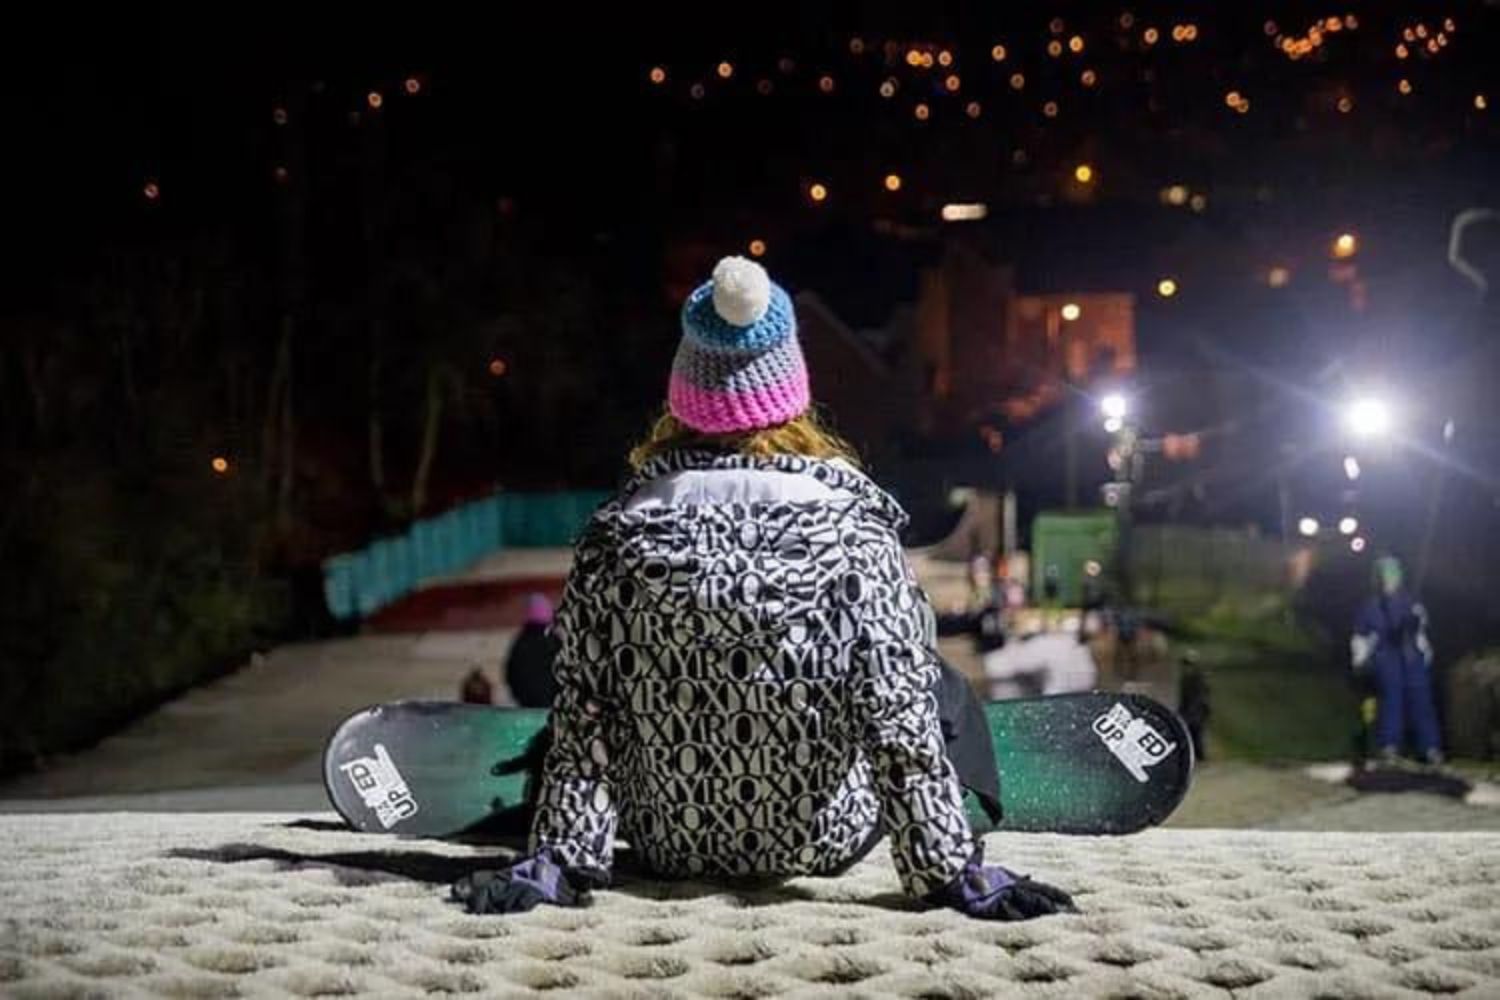 Woman snowboarder sat at top of dry ski slopes at night, Cardiff Ski and Snowboard Centre